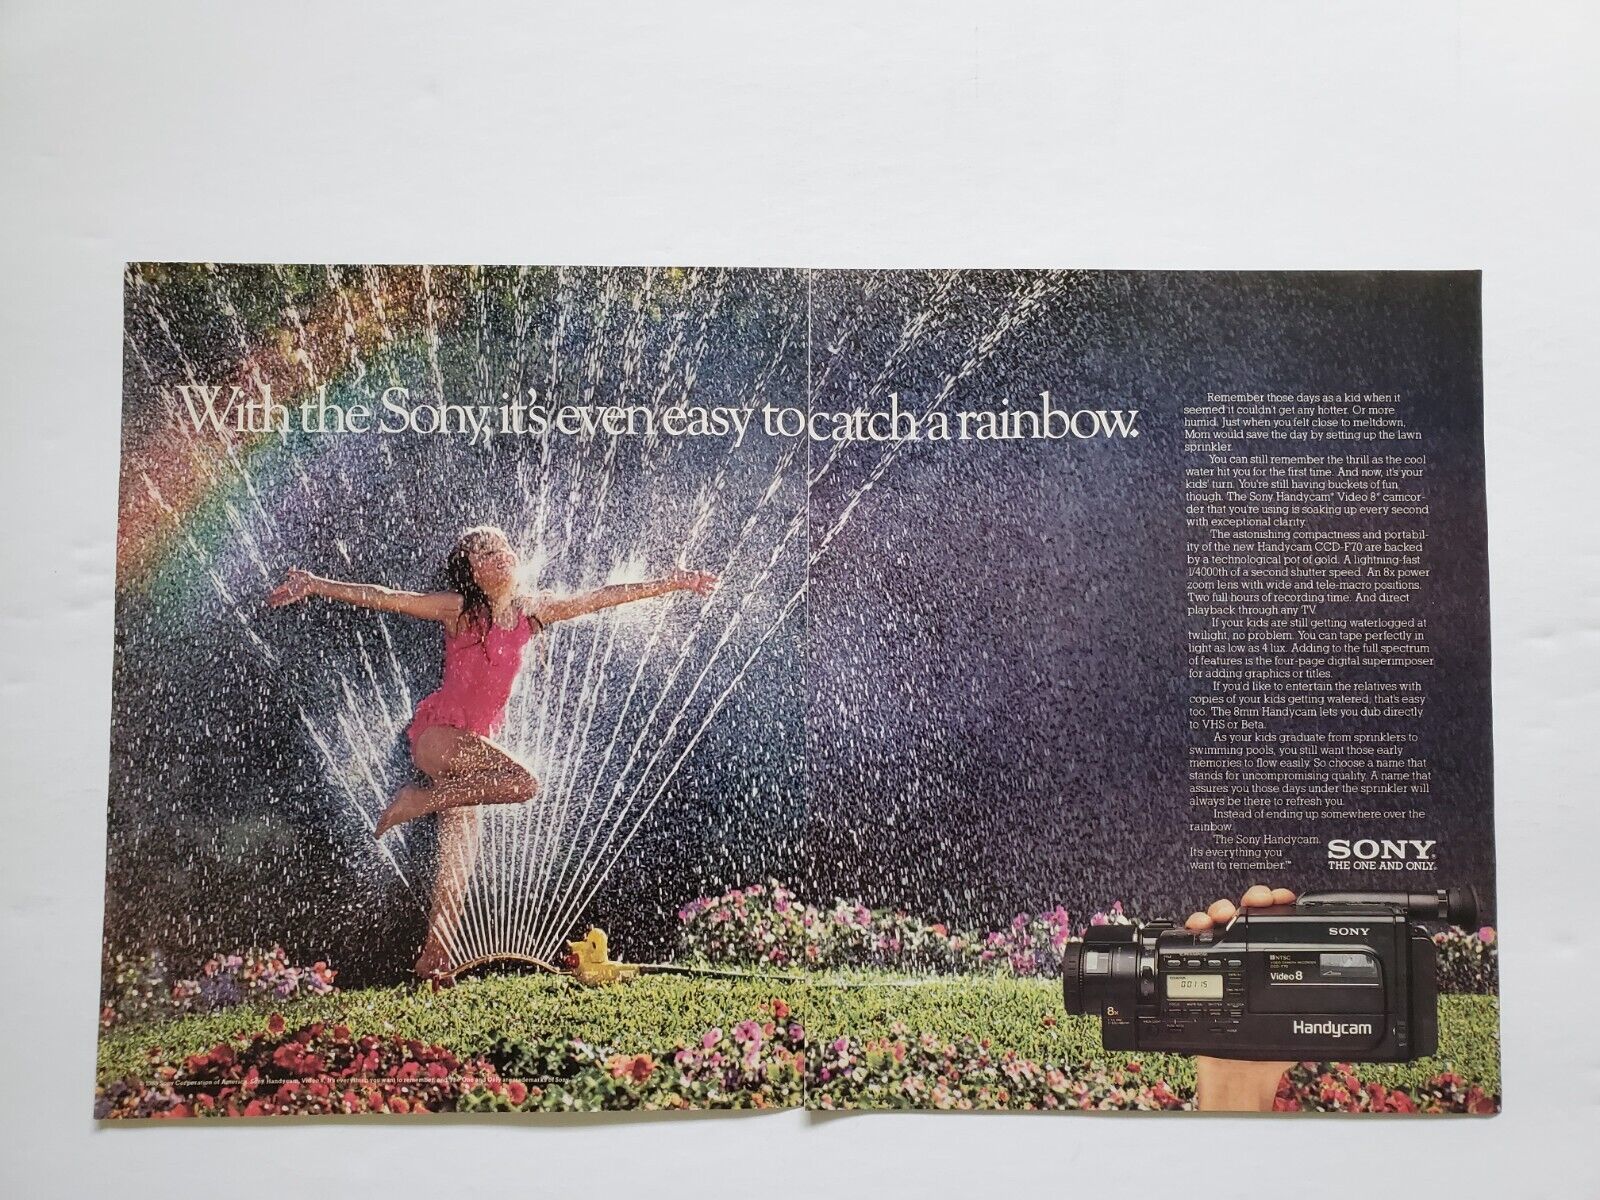 1989 Sony Handycam Two Page Vintage Print Ad Easy To Catch A Rainbow Summer Fun - $15.50